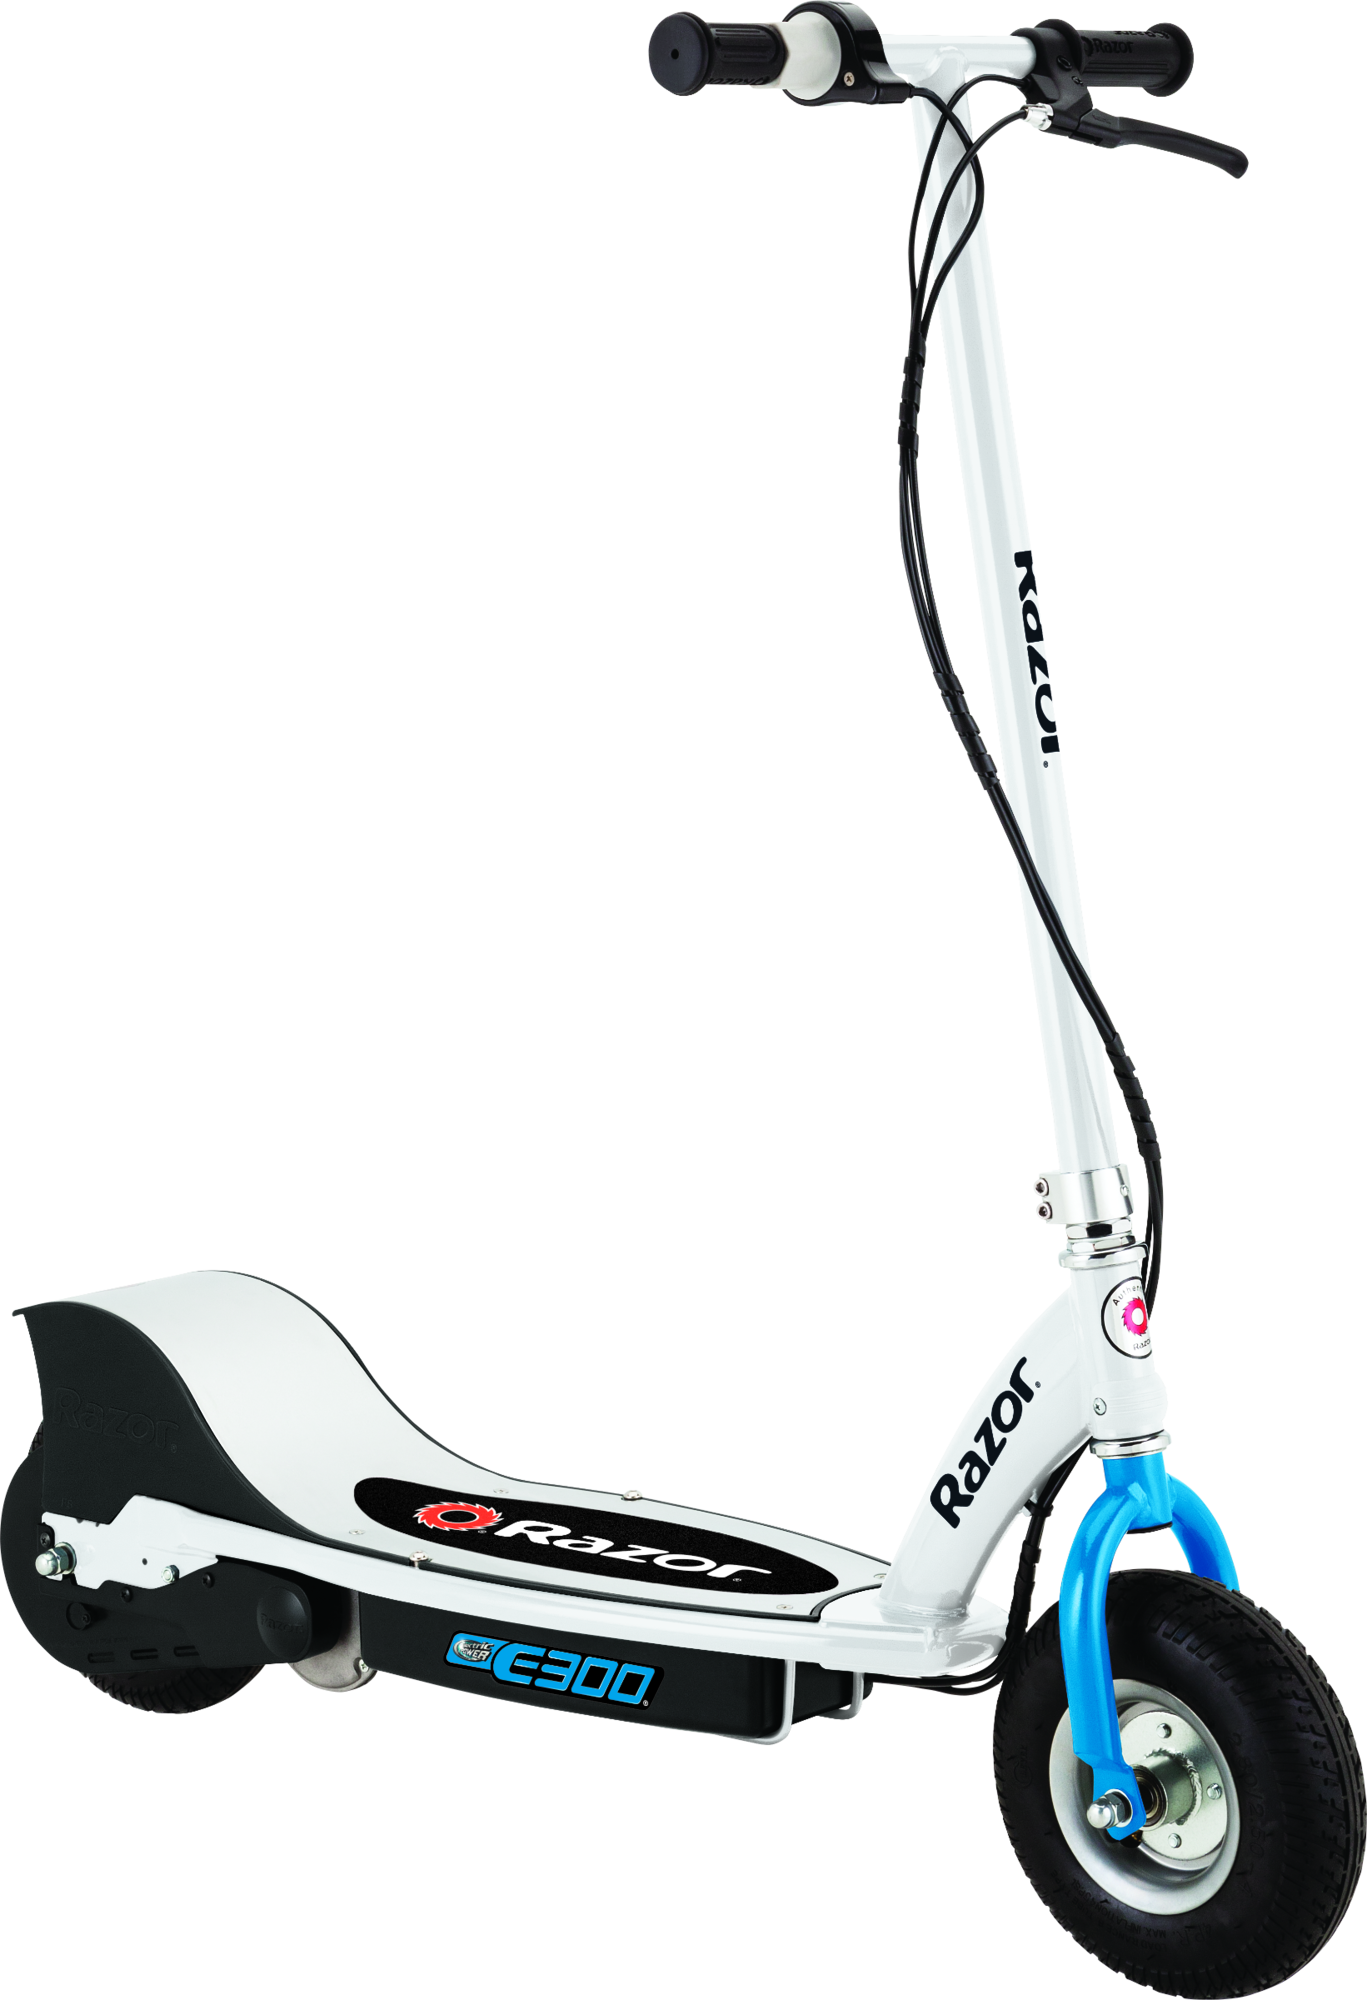 fastest electric scooter 2018